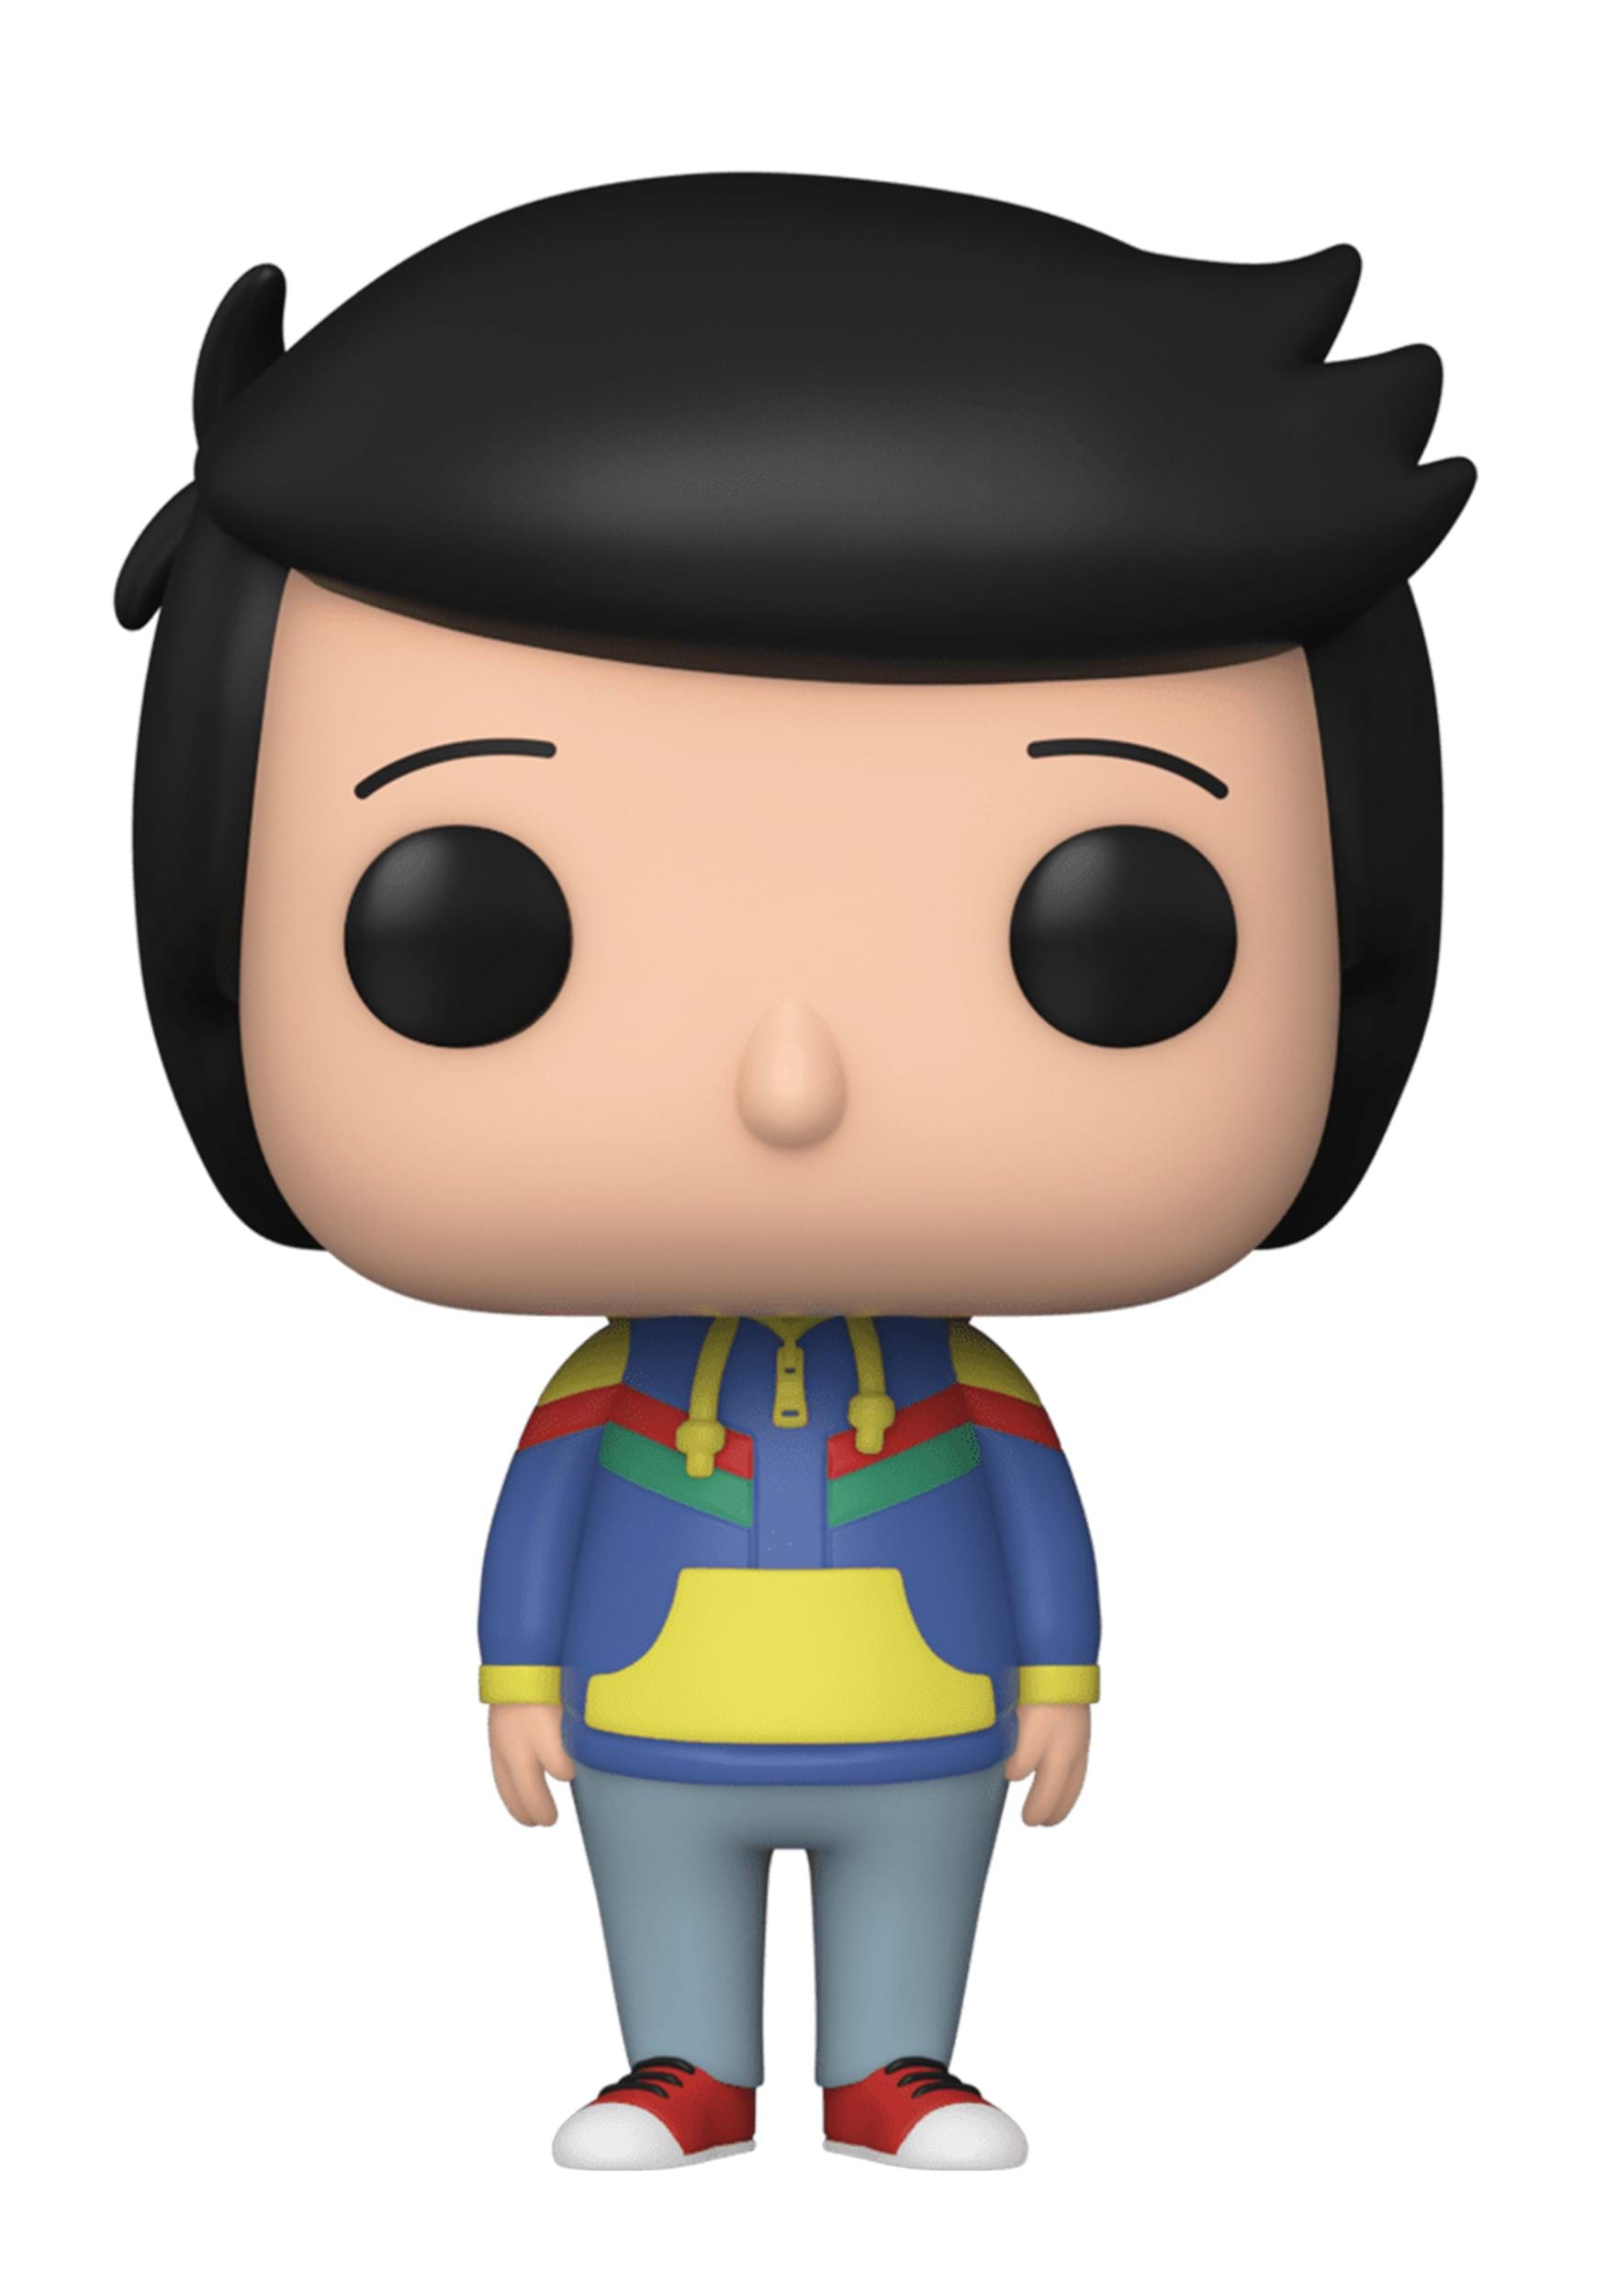 POP! Animation: Bobs Burgers 4 Year Old Bob Figure for Adults